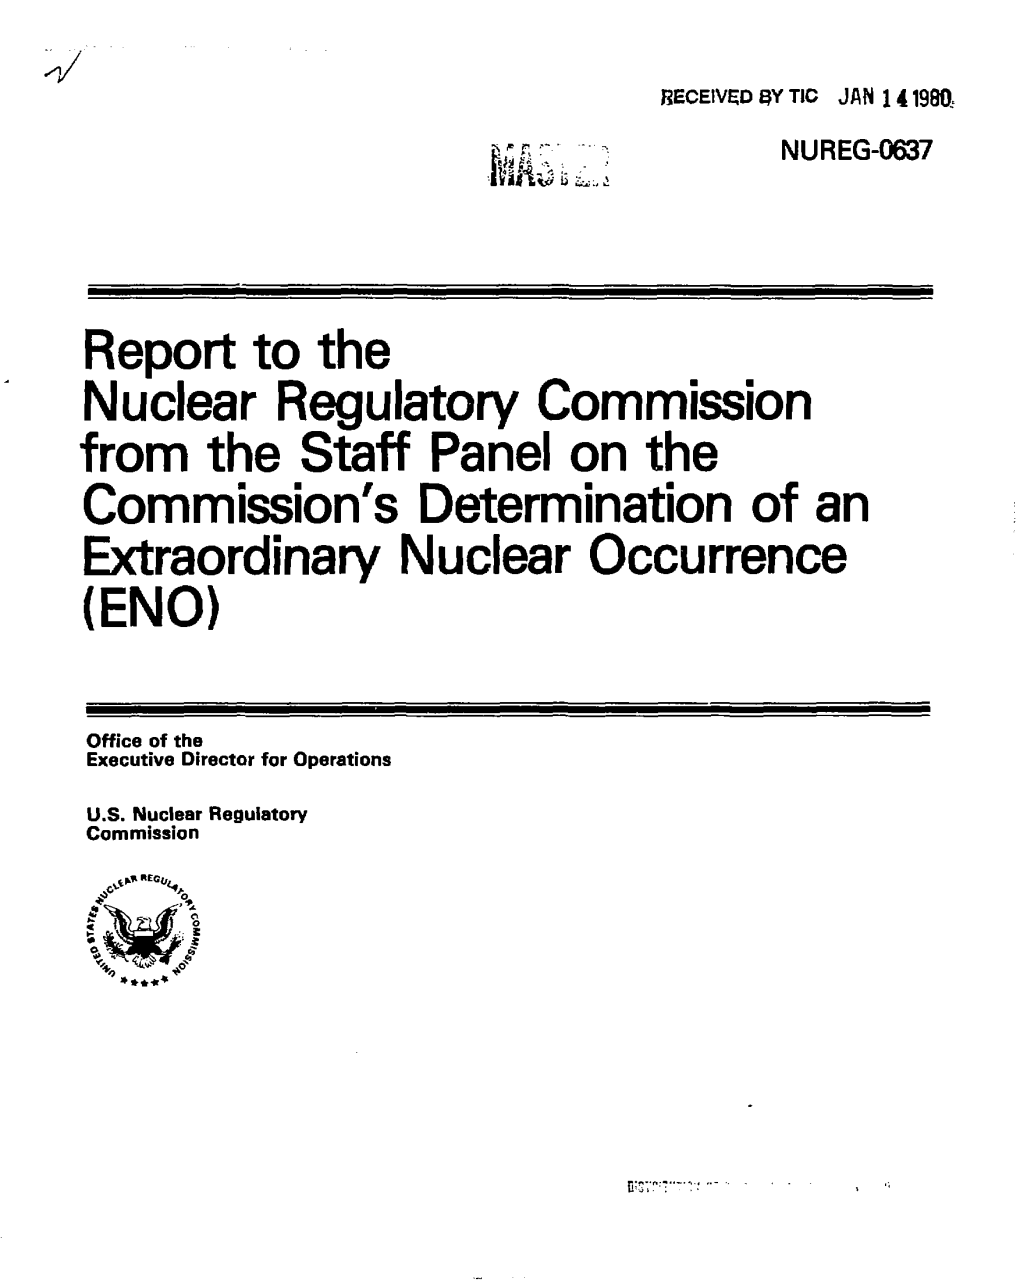 Report to the Nuclear Regulatory Commission from the Staff Panel on the Commission's Determination of an Extraordinary Nuclear Occurrence (ENO)